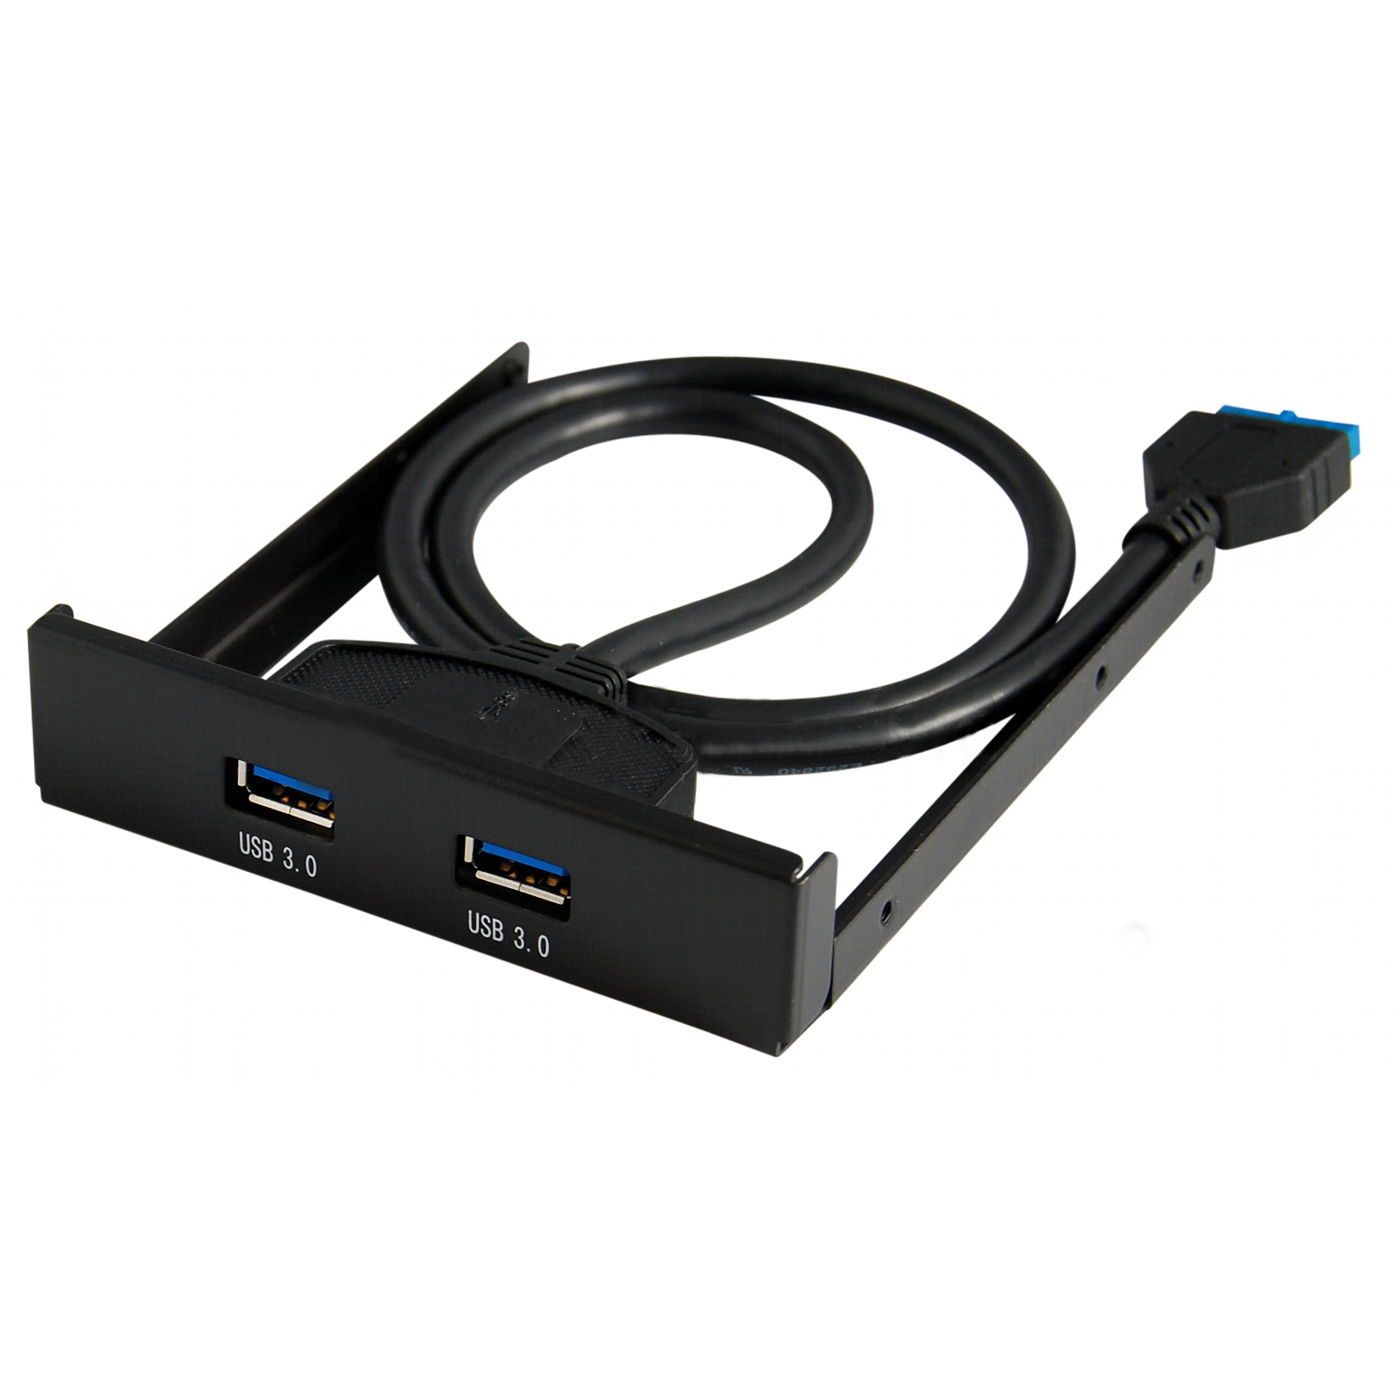 USB 3.0 Front Panel 3.5 Expansion Bay To 20 Pin MoBo Bracket Cable 2 ...